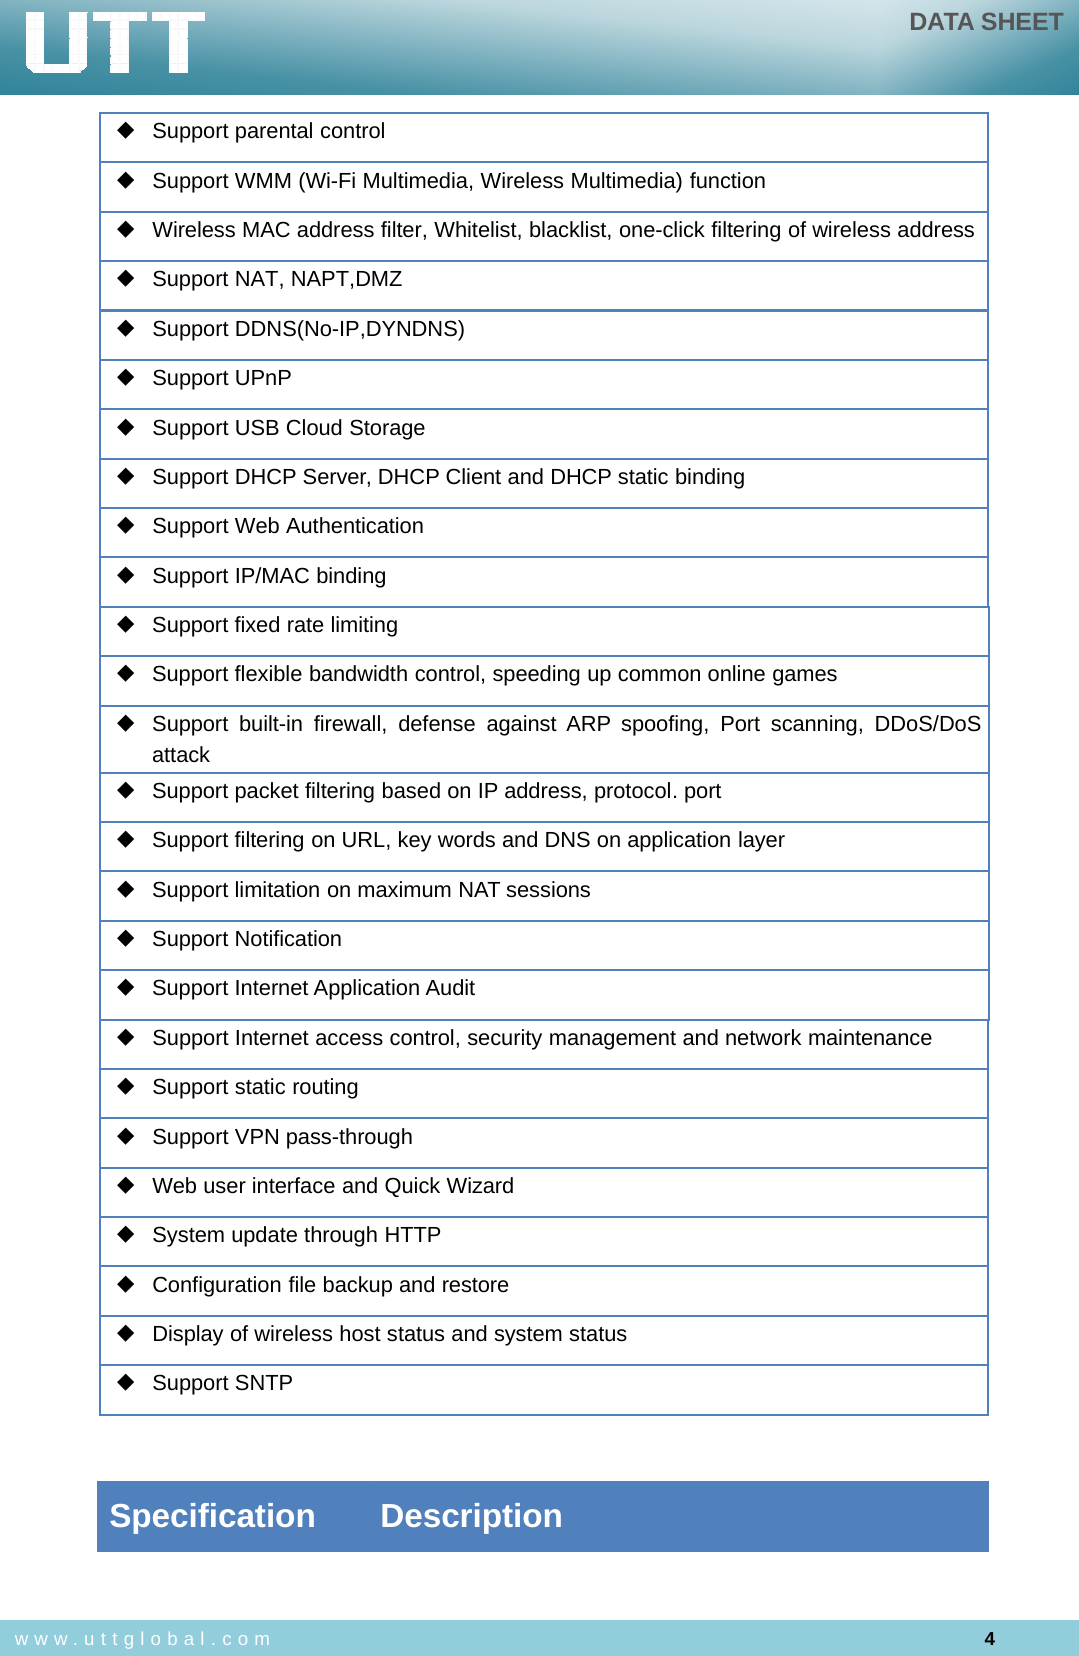 DATA SHEET4www.uttglobal.comSpecification Description◆Support parental control◆Support WMM (Wi-Fi Multimedia, Wireless Multimedia) function◆Wireless MAC address filter, Whitelist, blacklist, one-click filtering of wireless address◆SupportNAT,NAPT,DMZ◆Support DDNS(No-IP,DYNDNS)◆Support UPnP◆Support USB Cloud Storage◆Support DHCP Server, DHCP Client and DHCP static binding◆Support Web Authentication◆Support IP/MAC binding◆Support fixed rate limiting◆Support flexible bandwidth control, speeding up common online games◆Support built-in firewall, defense against ARP spoofing, Port scanning, DDoS/DoSattack◆Support packet filtering based on IP address, protocol. port◆Support filtering on URL, key words and DNS on application layer◆Support limitation on maximum NAT sessions◆Support Notification◆Support Internet Application Audit◆Support Internet access control, security management and network maintenance◆Support static routing◆Support VPN pass-through◆Web user interface and Quick Wizard◆System update through HTTP◆Configuration file backup and restore◆Display of wireless host status and system status◆Support SNTP